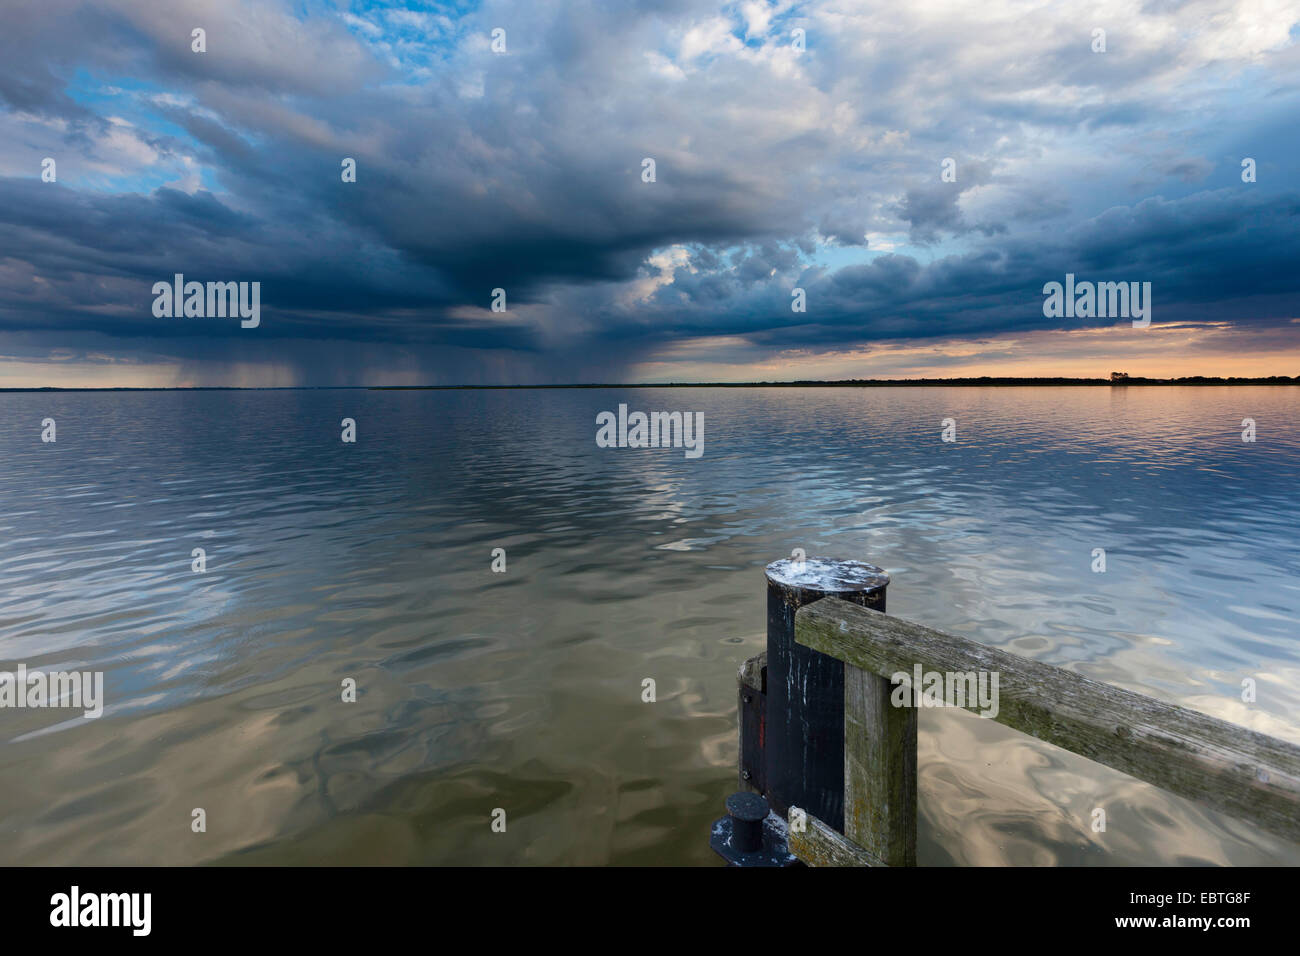 storm clouds over the bodden, Germany, Mecklenburg-Western Pomerania, Wustrow Stock Photo